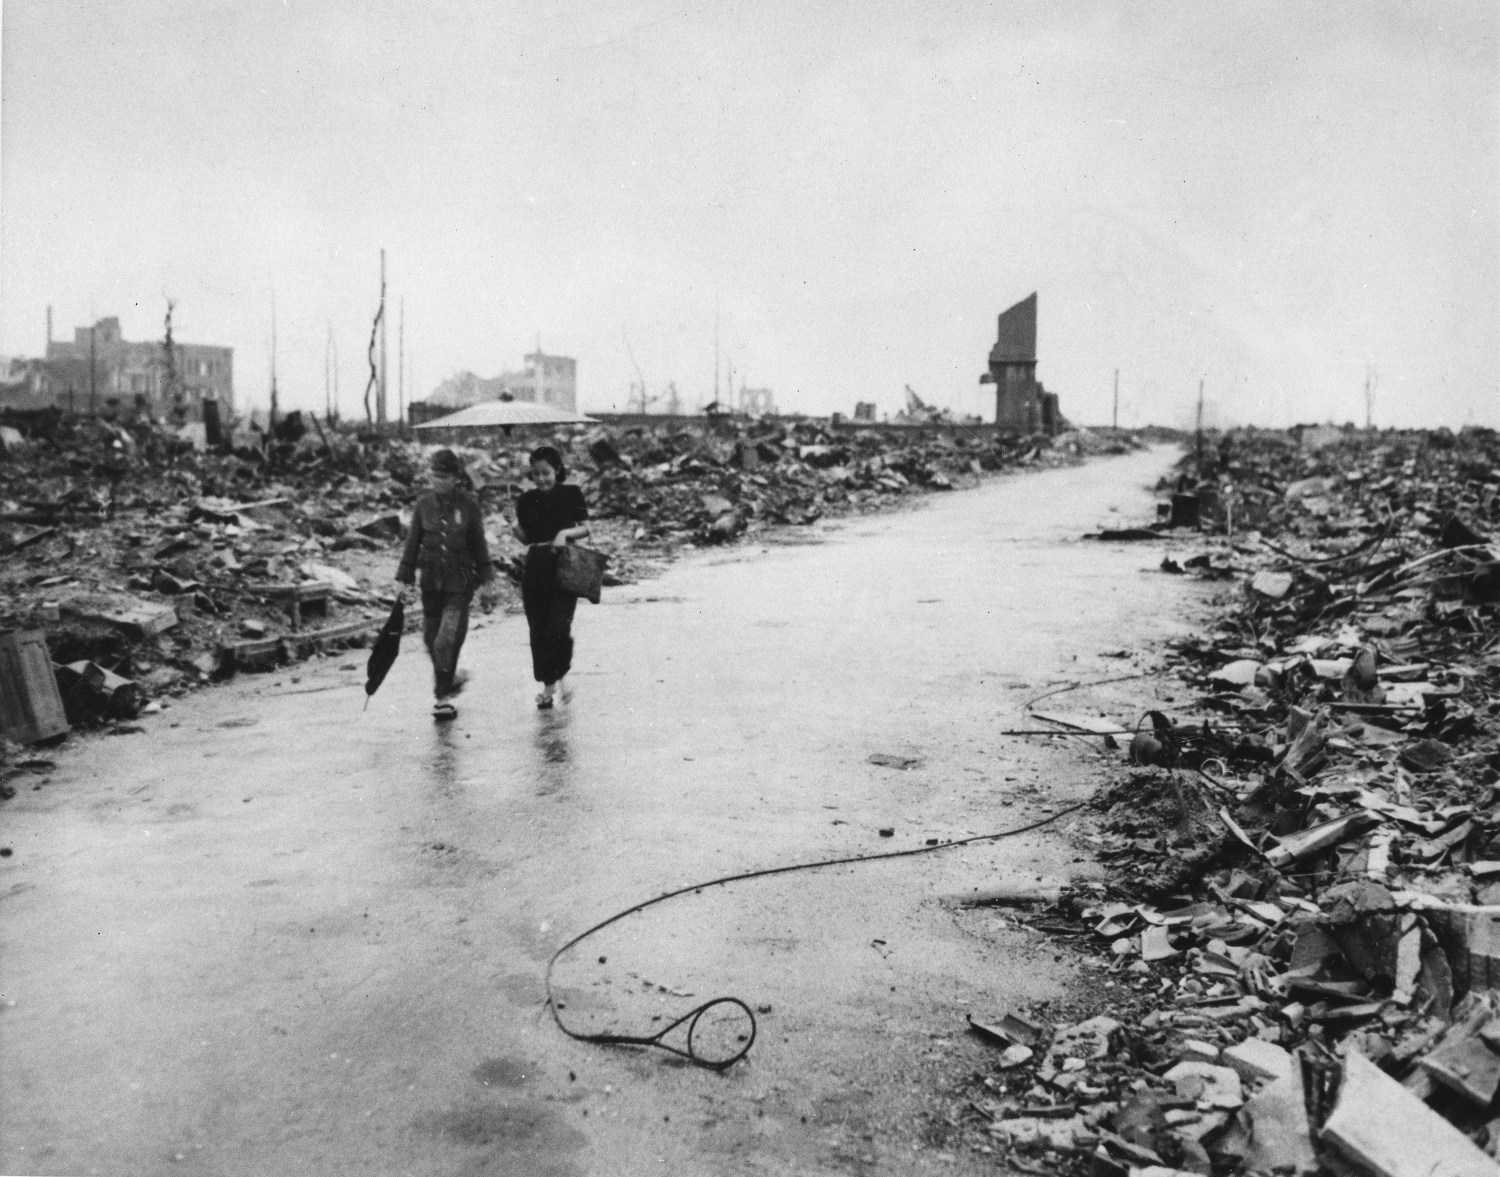 25+ Photos Put The Depressing Aftermath Of Hiroshima Into Perspective